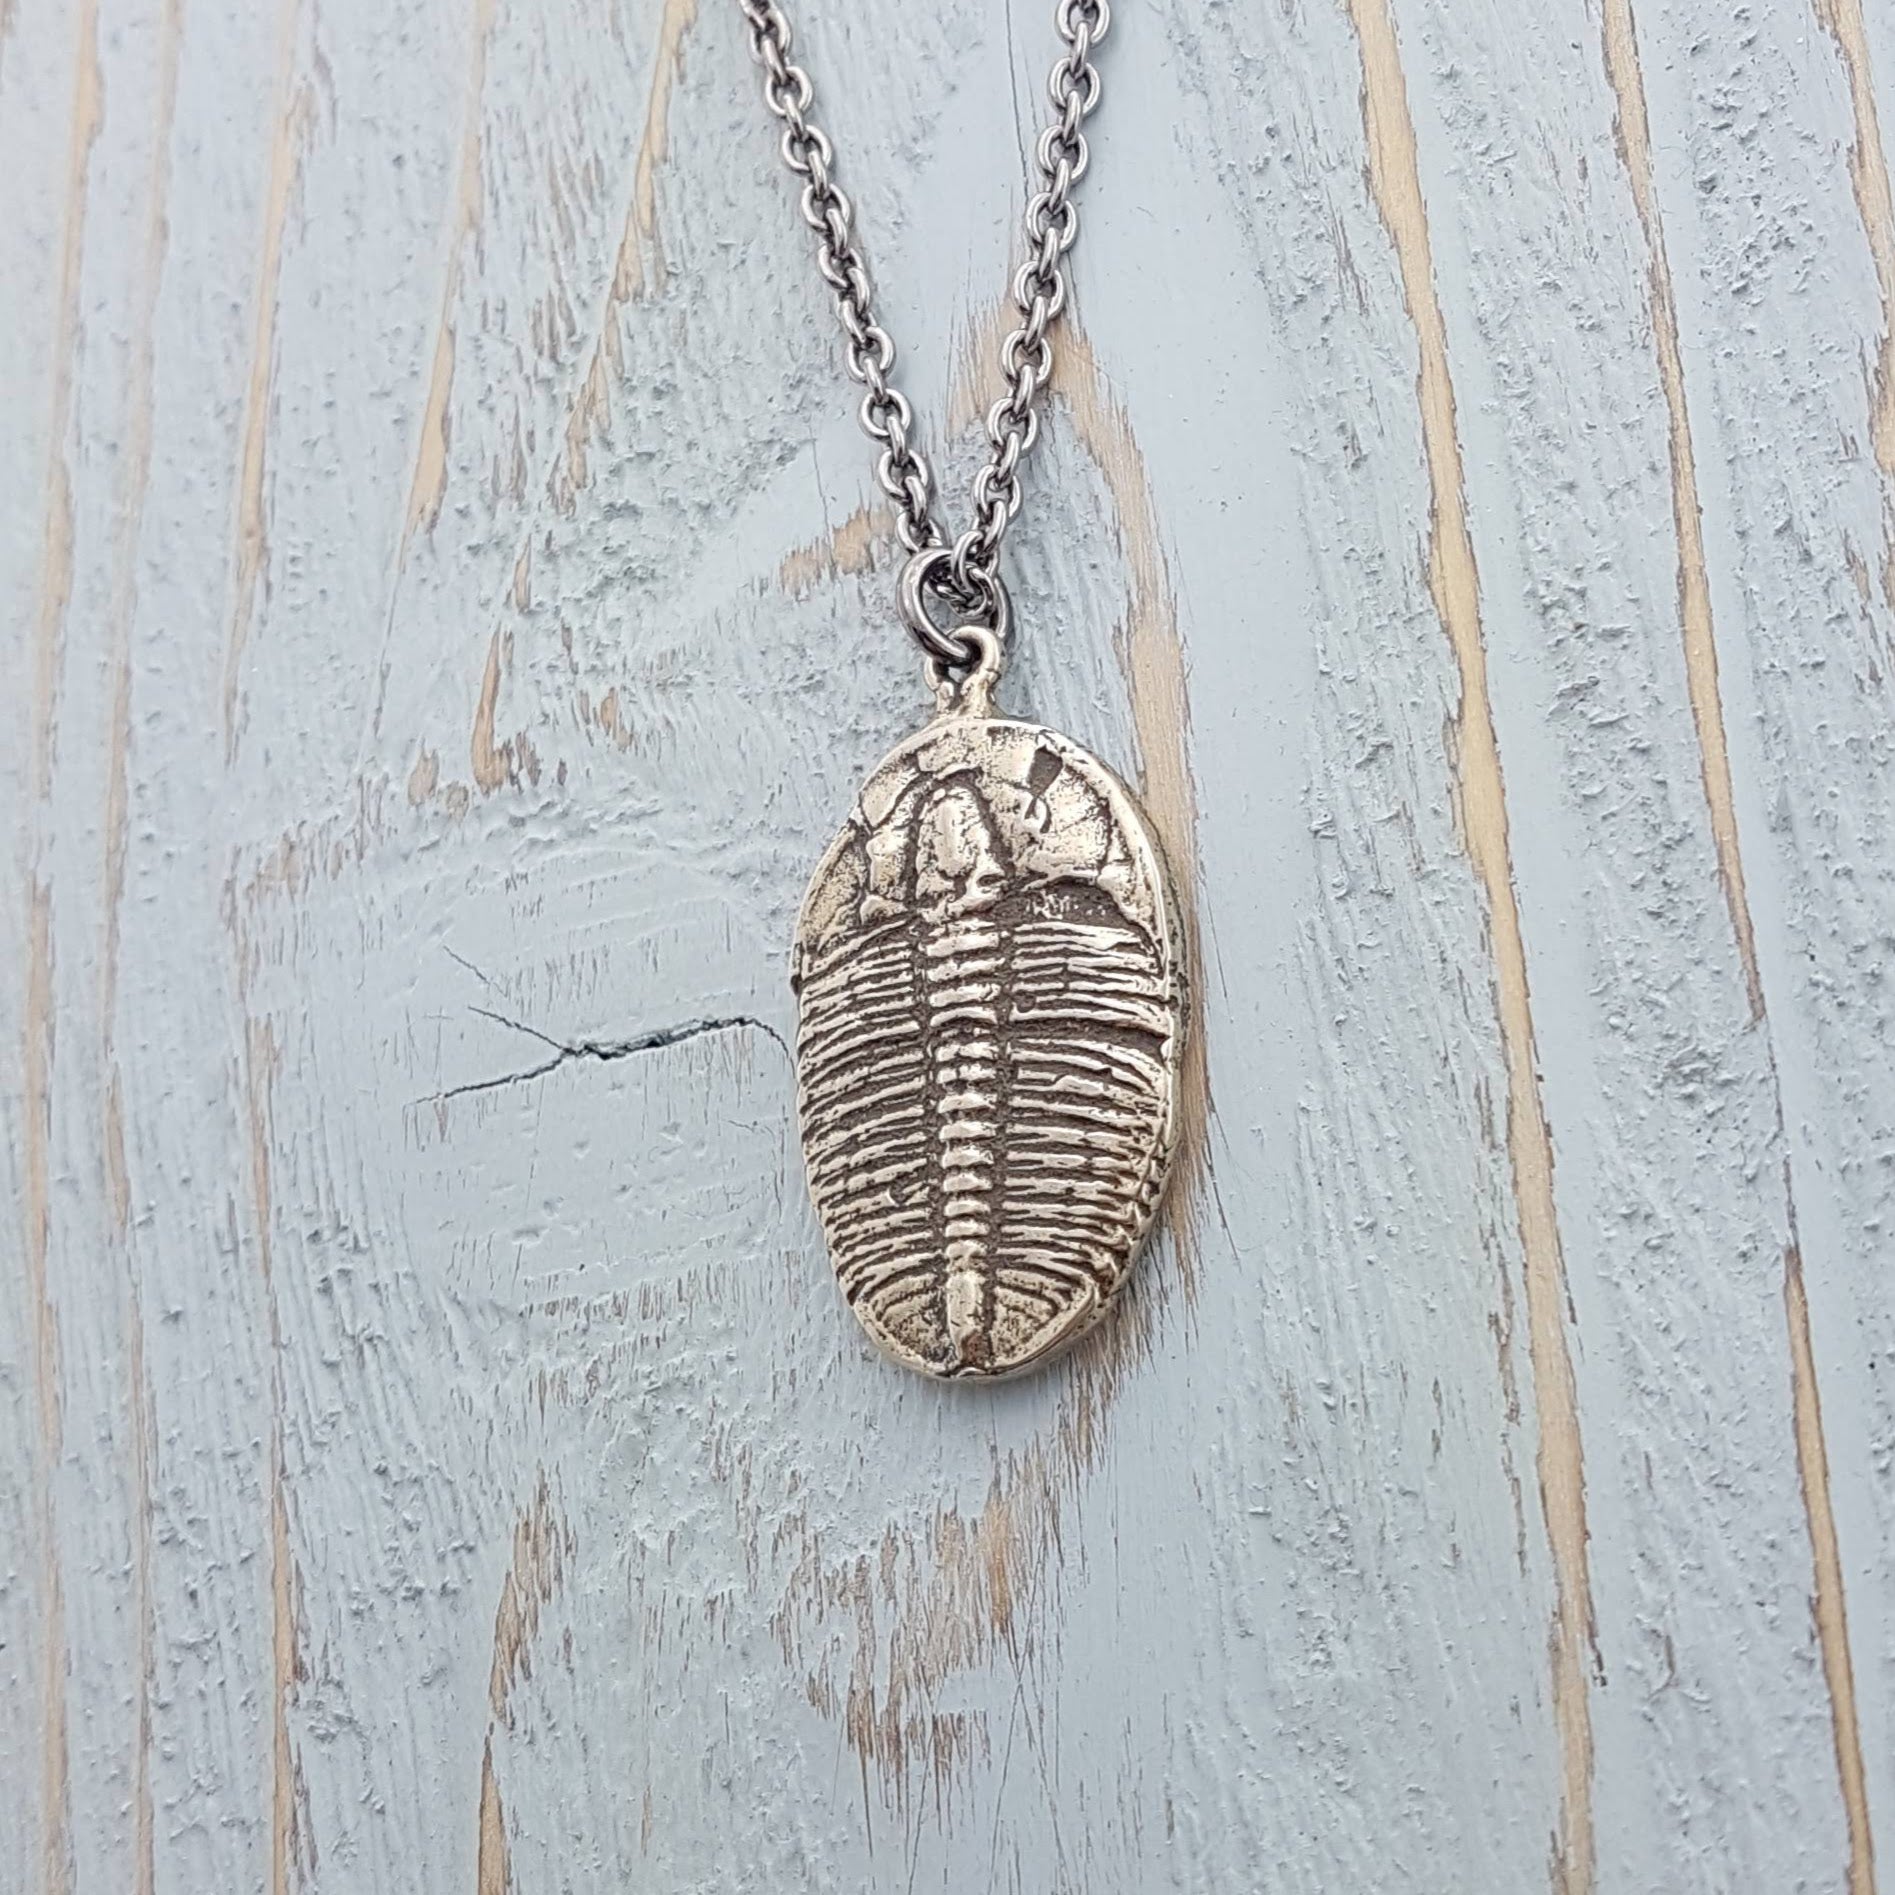 Trilobite Fossil Necklace - Gwen Delicious Jewelry Designs